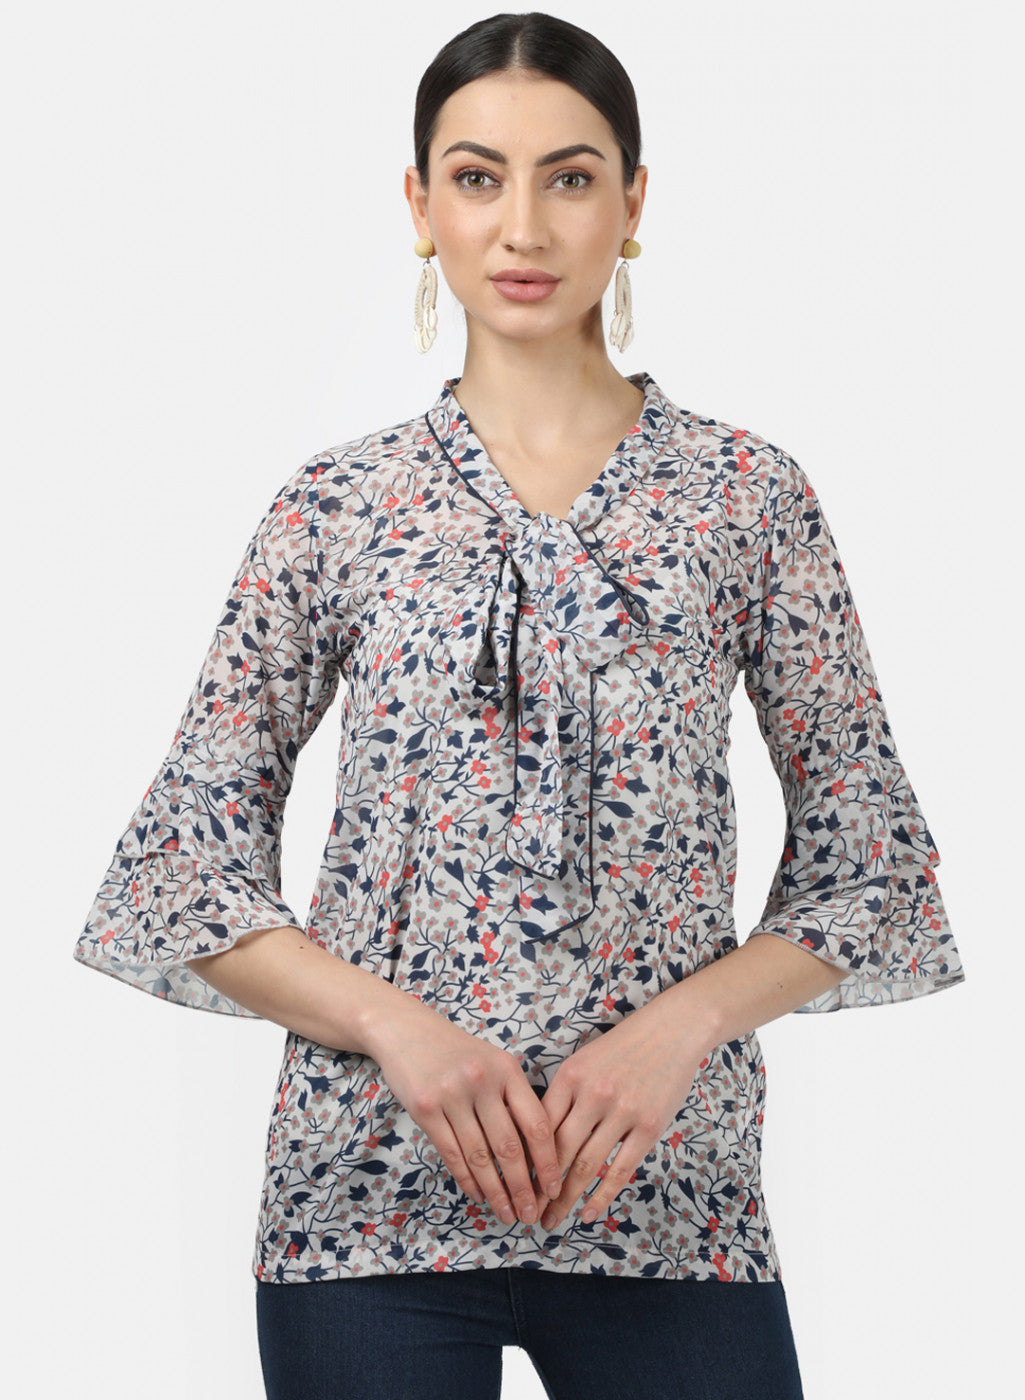 Buy Womens Multi Color Printed Tops Online in India - Monte Carlo